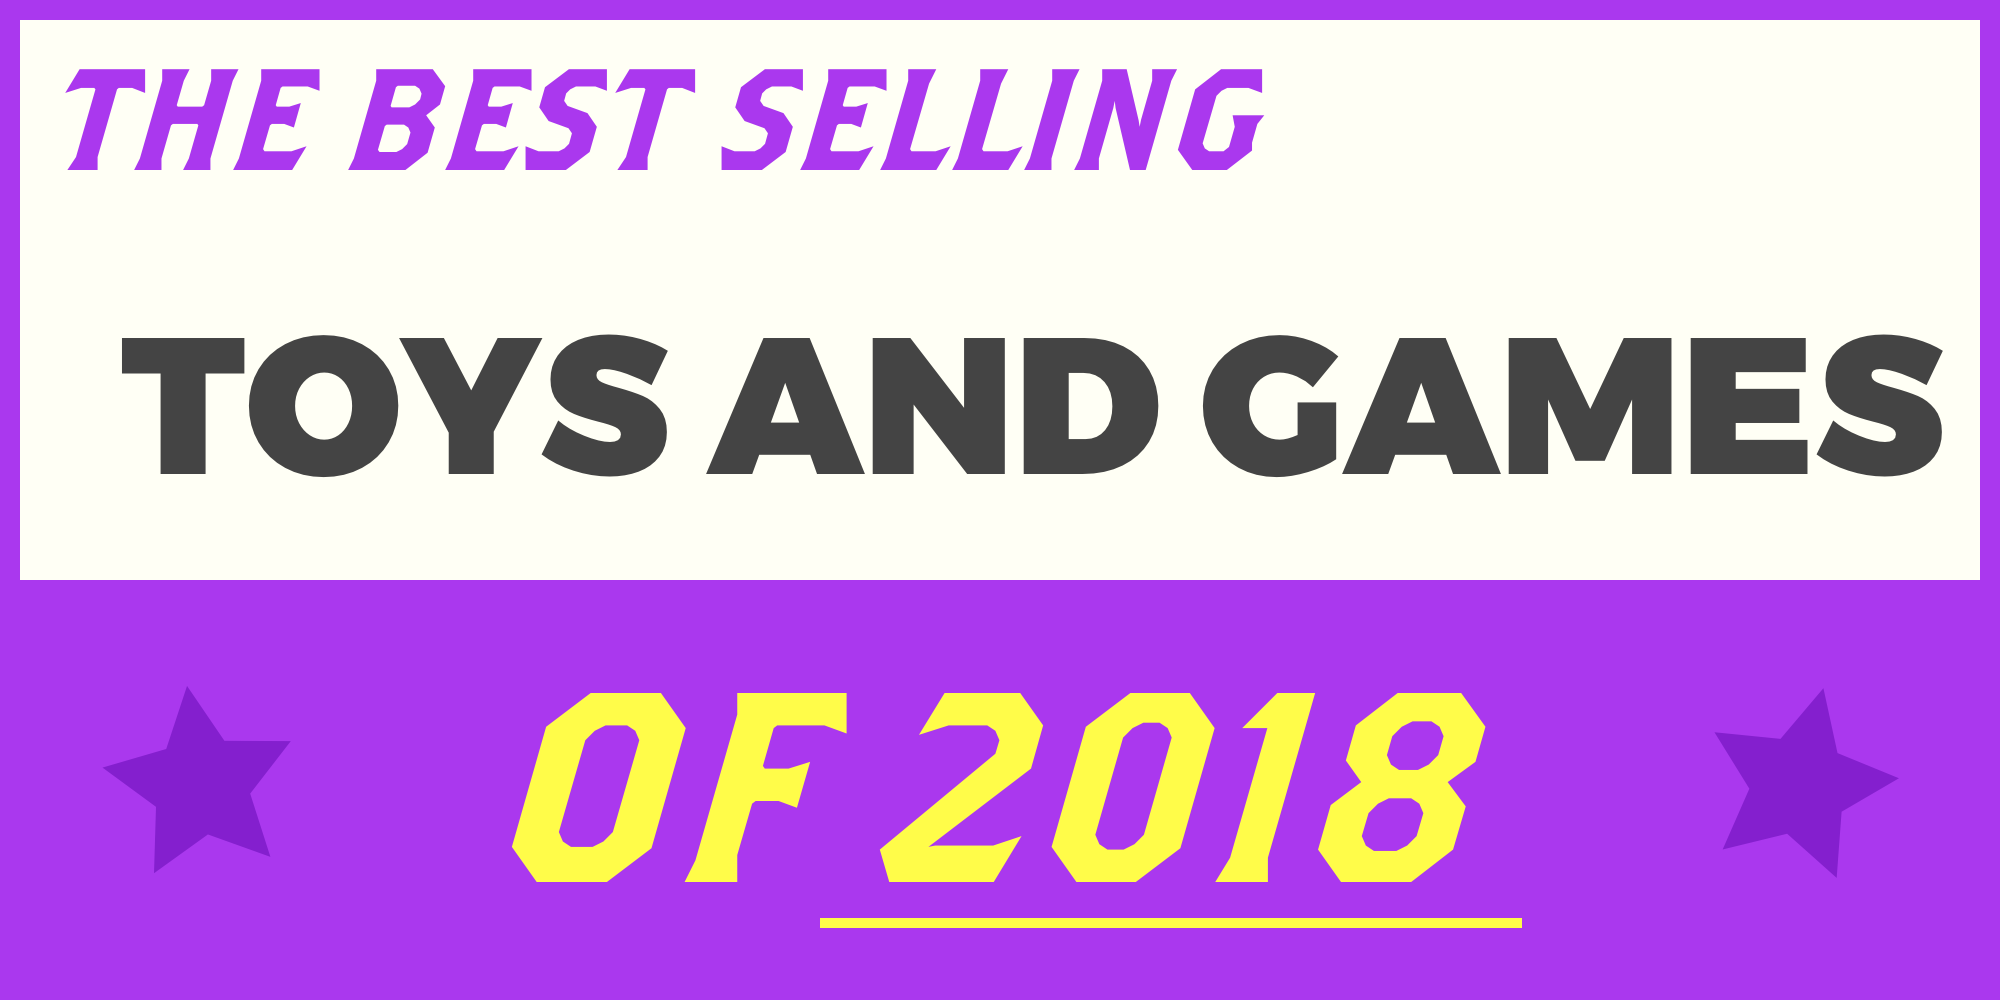 top selling toys of 2018